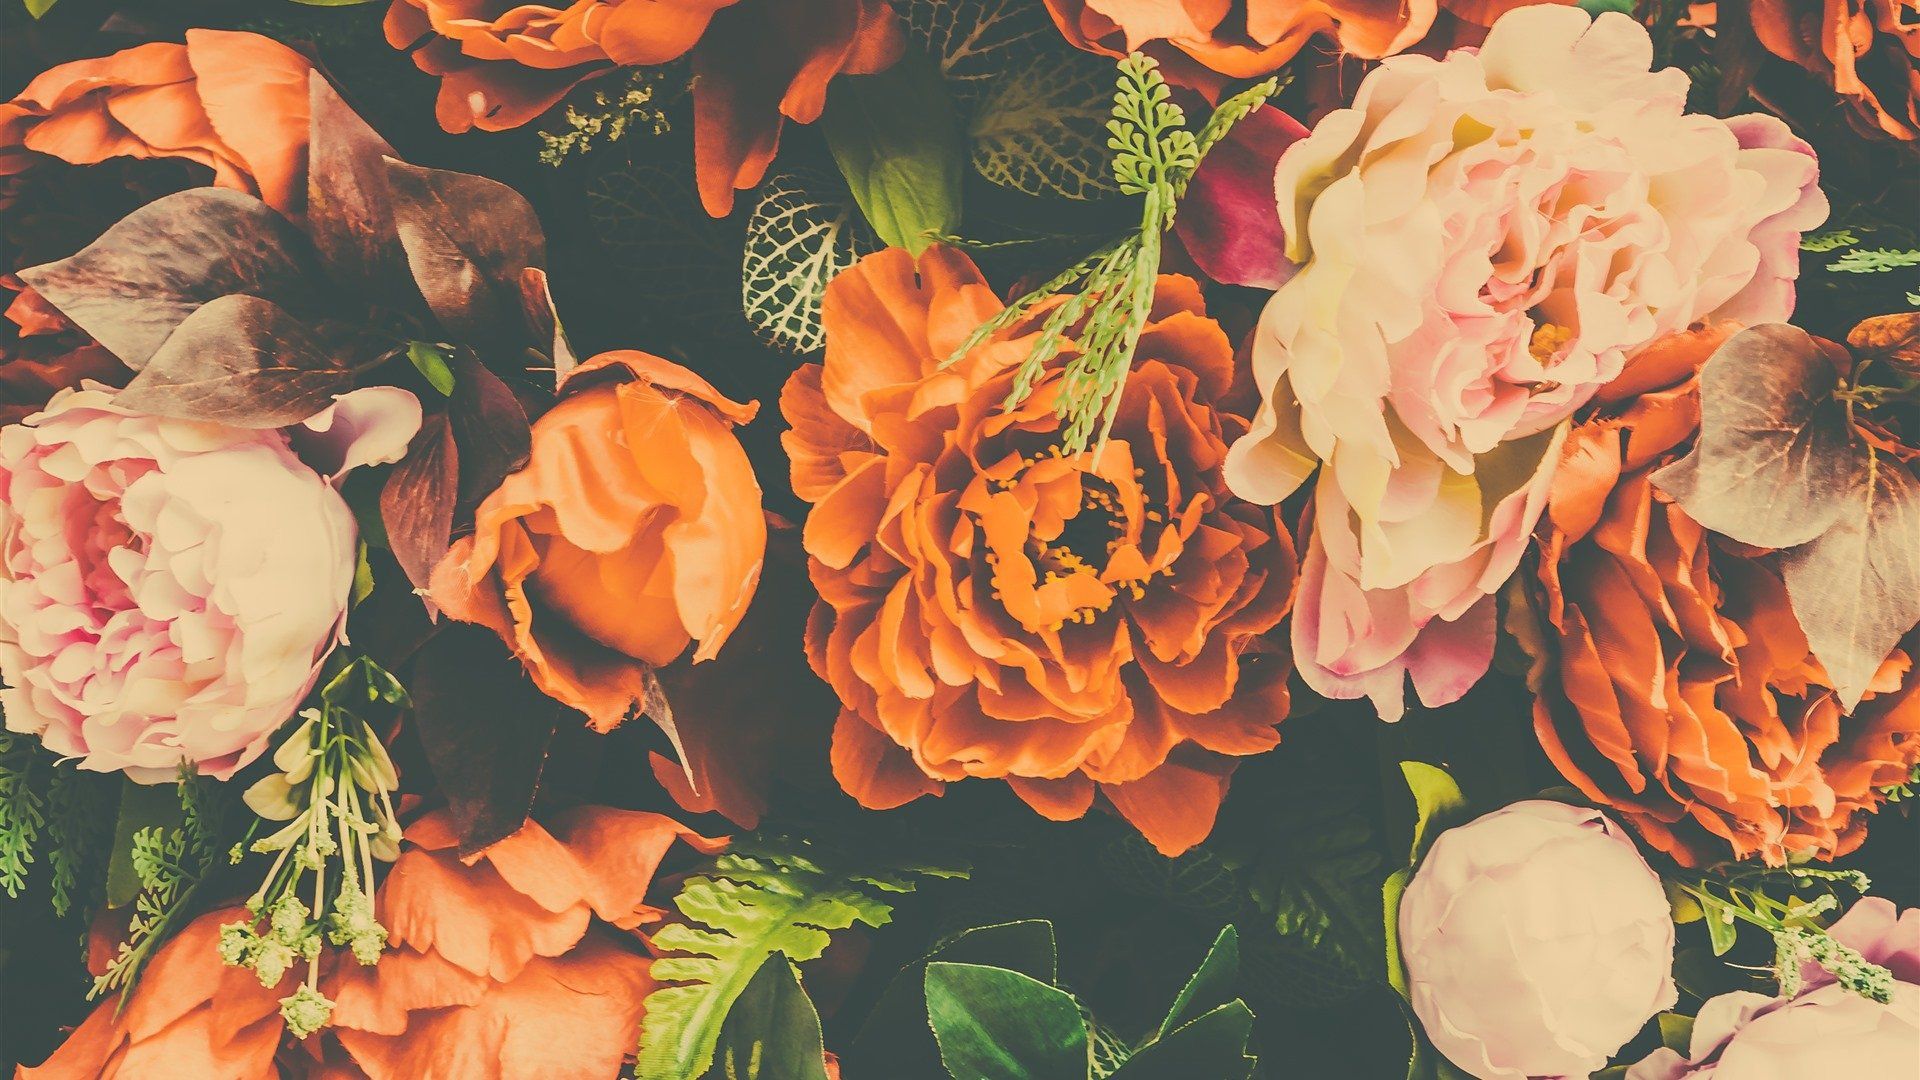 A variety of flowers in shades of orange, pink, and white. - Orange, flower